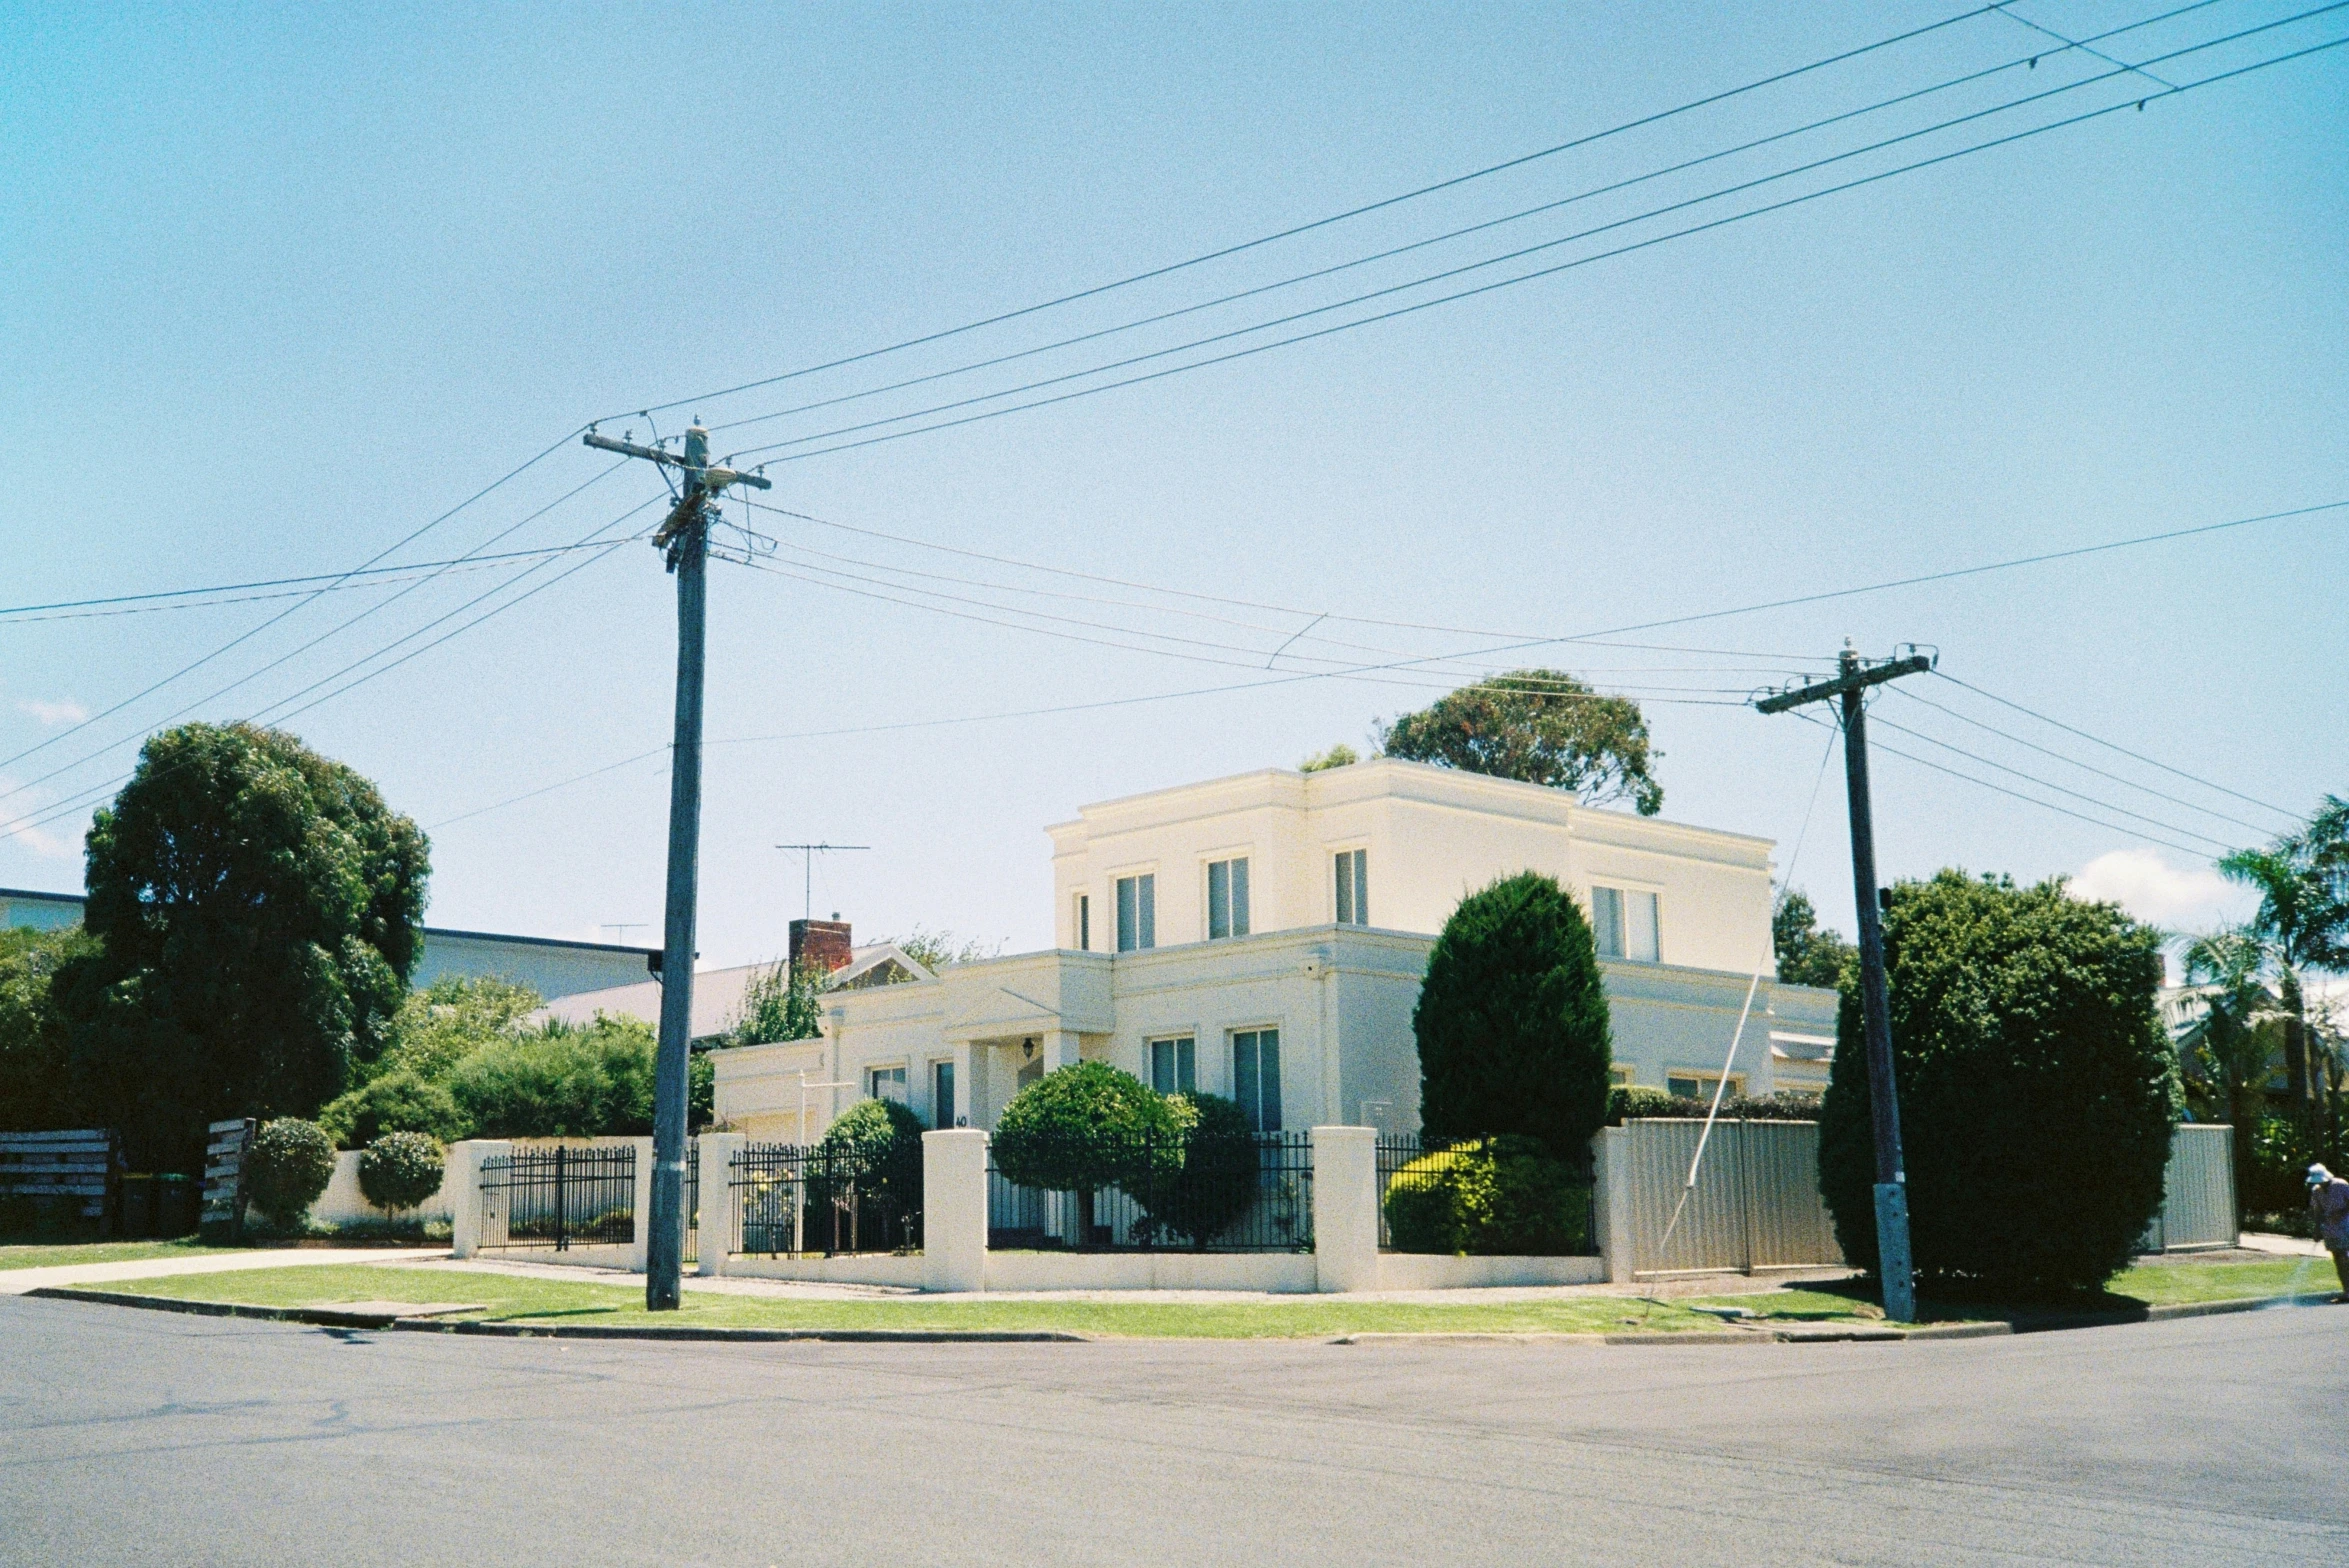 an intersection with three telephone poles and a large house on the side